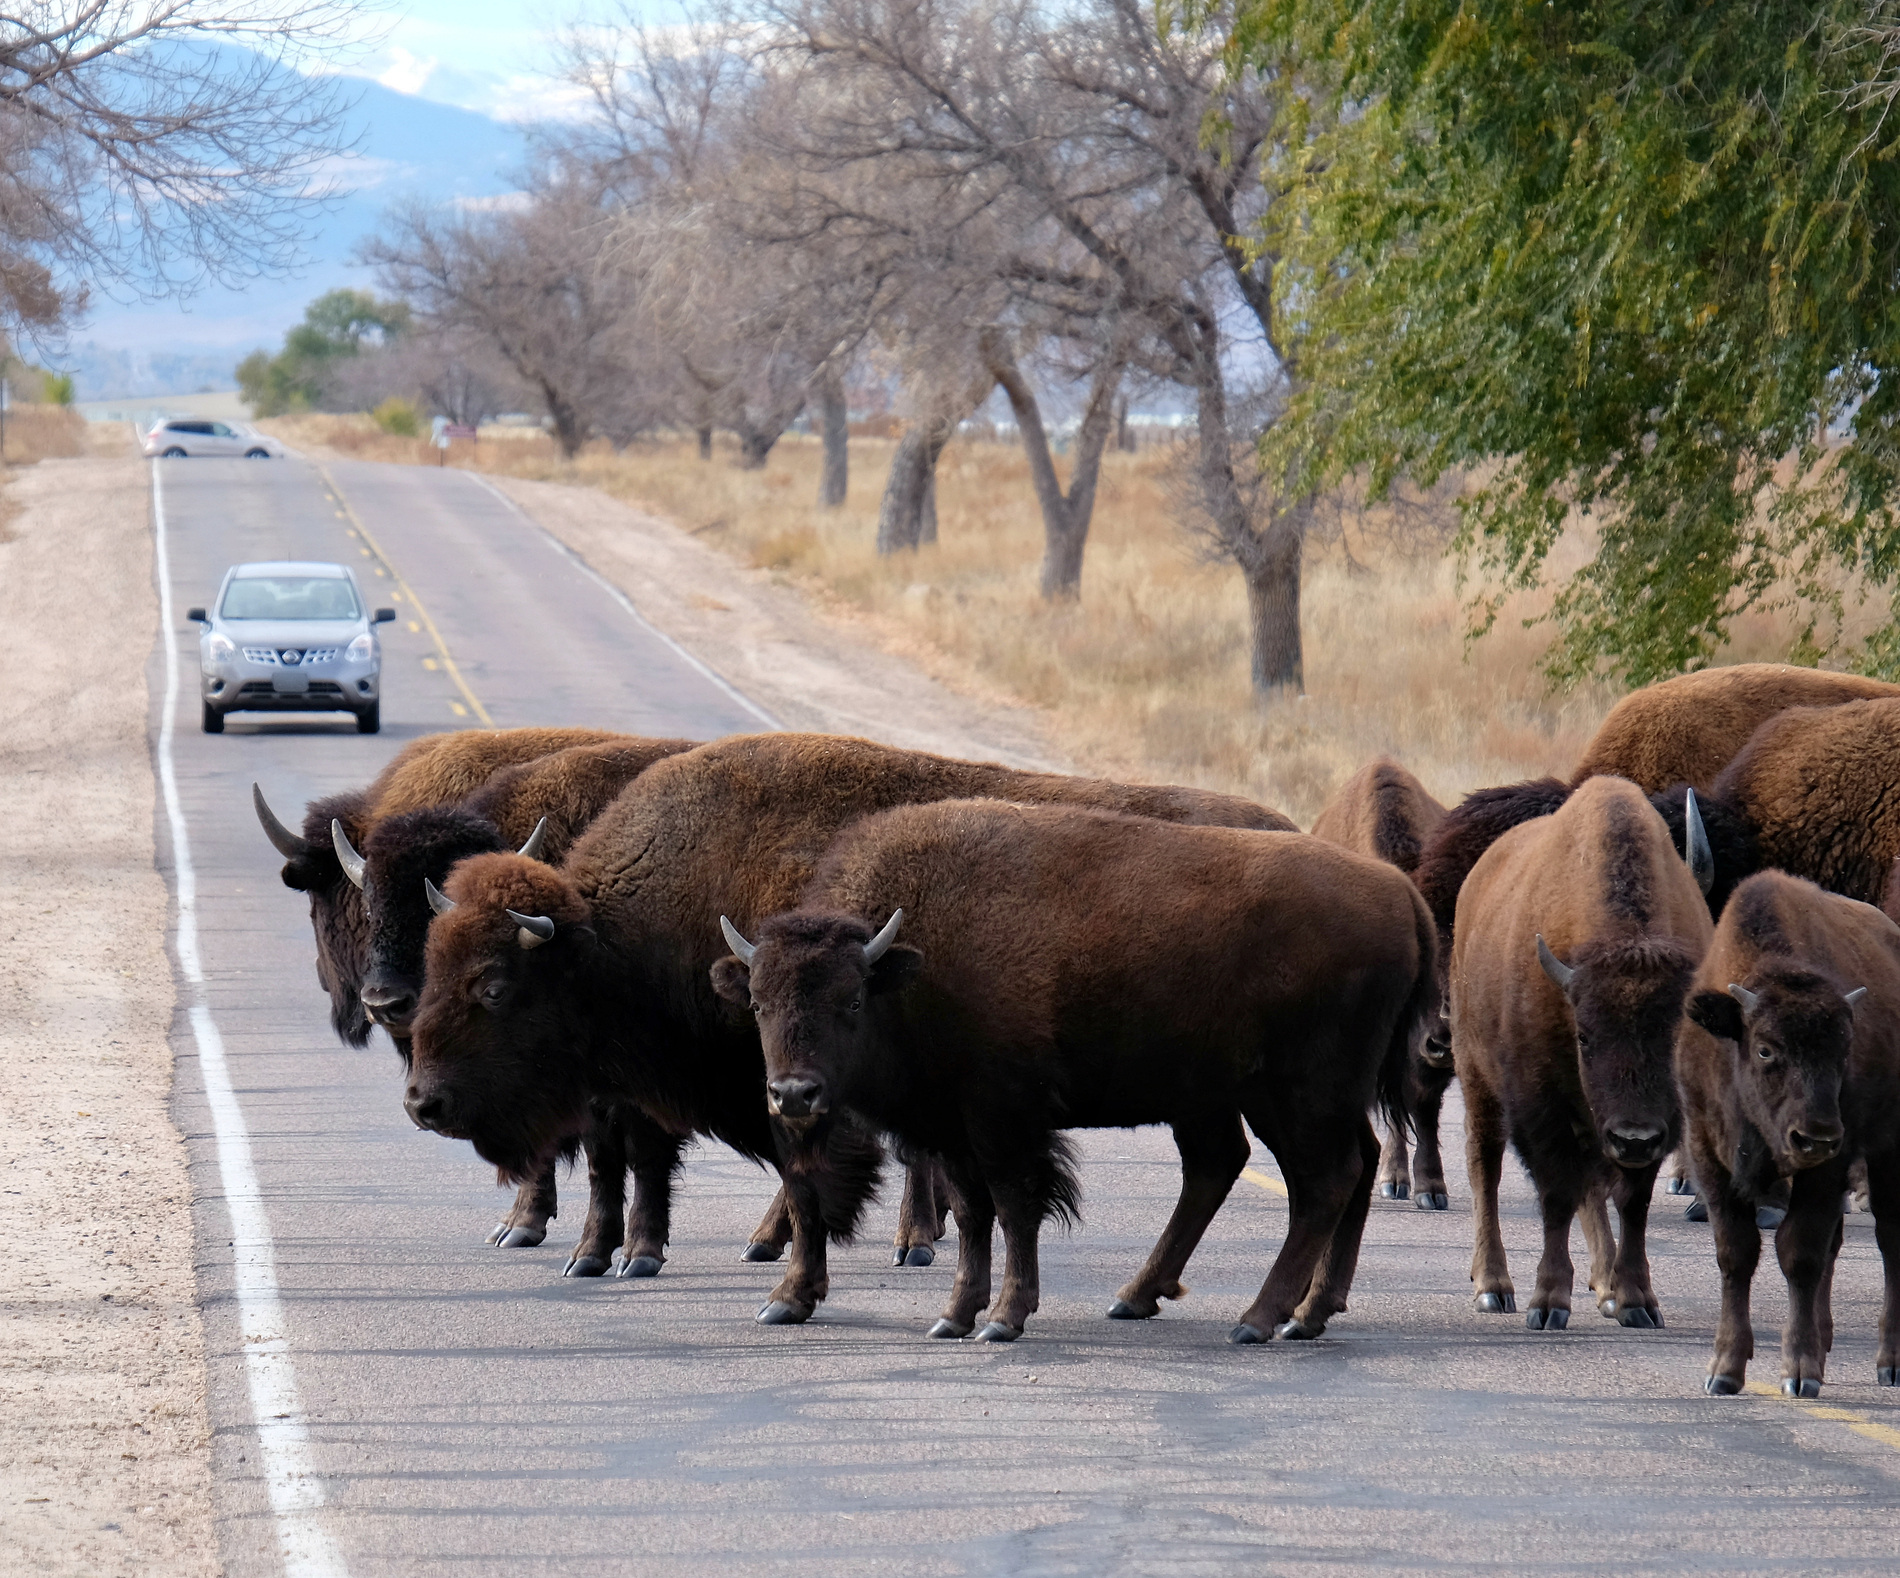 Plans are underway to see wild bison roaming at this US airport